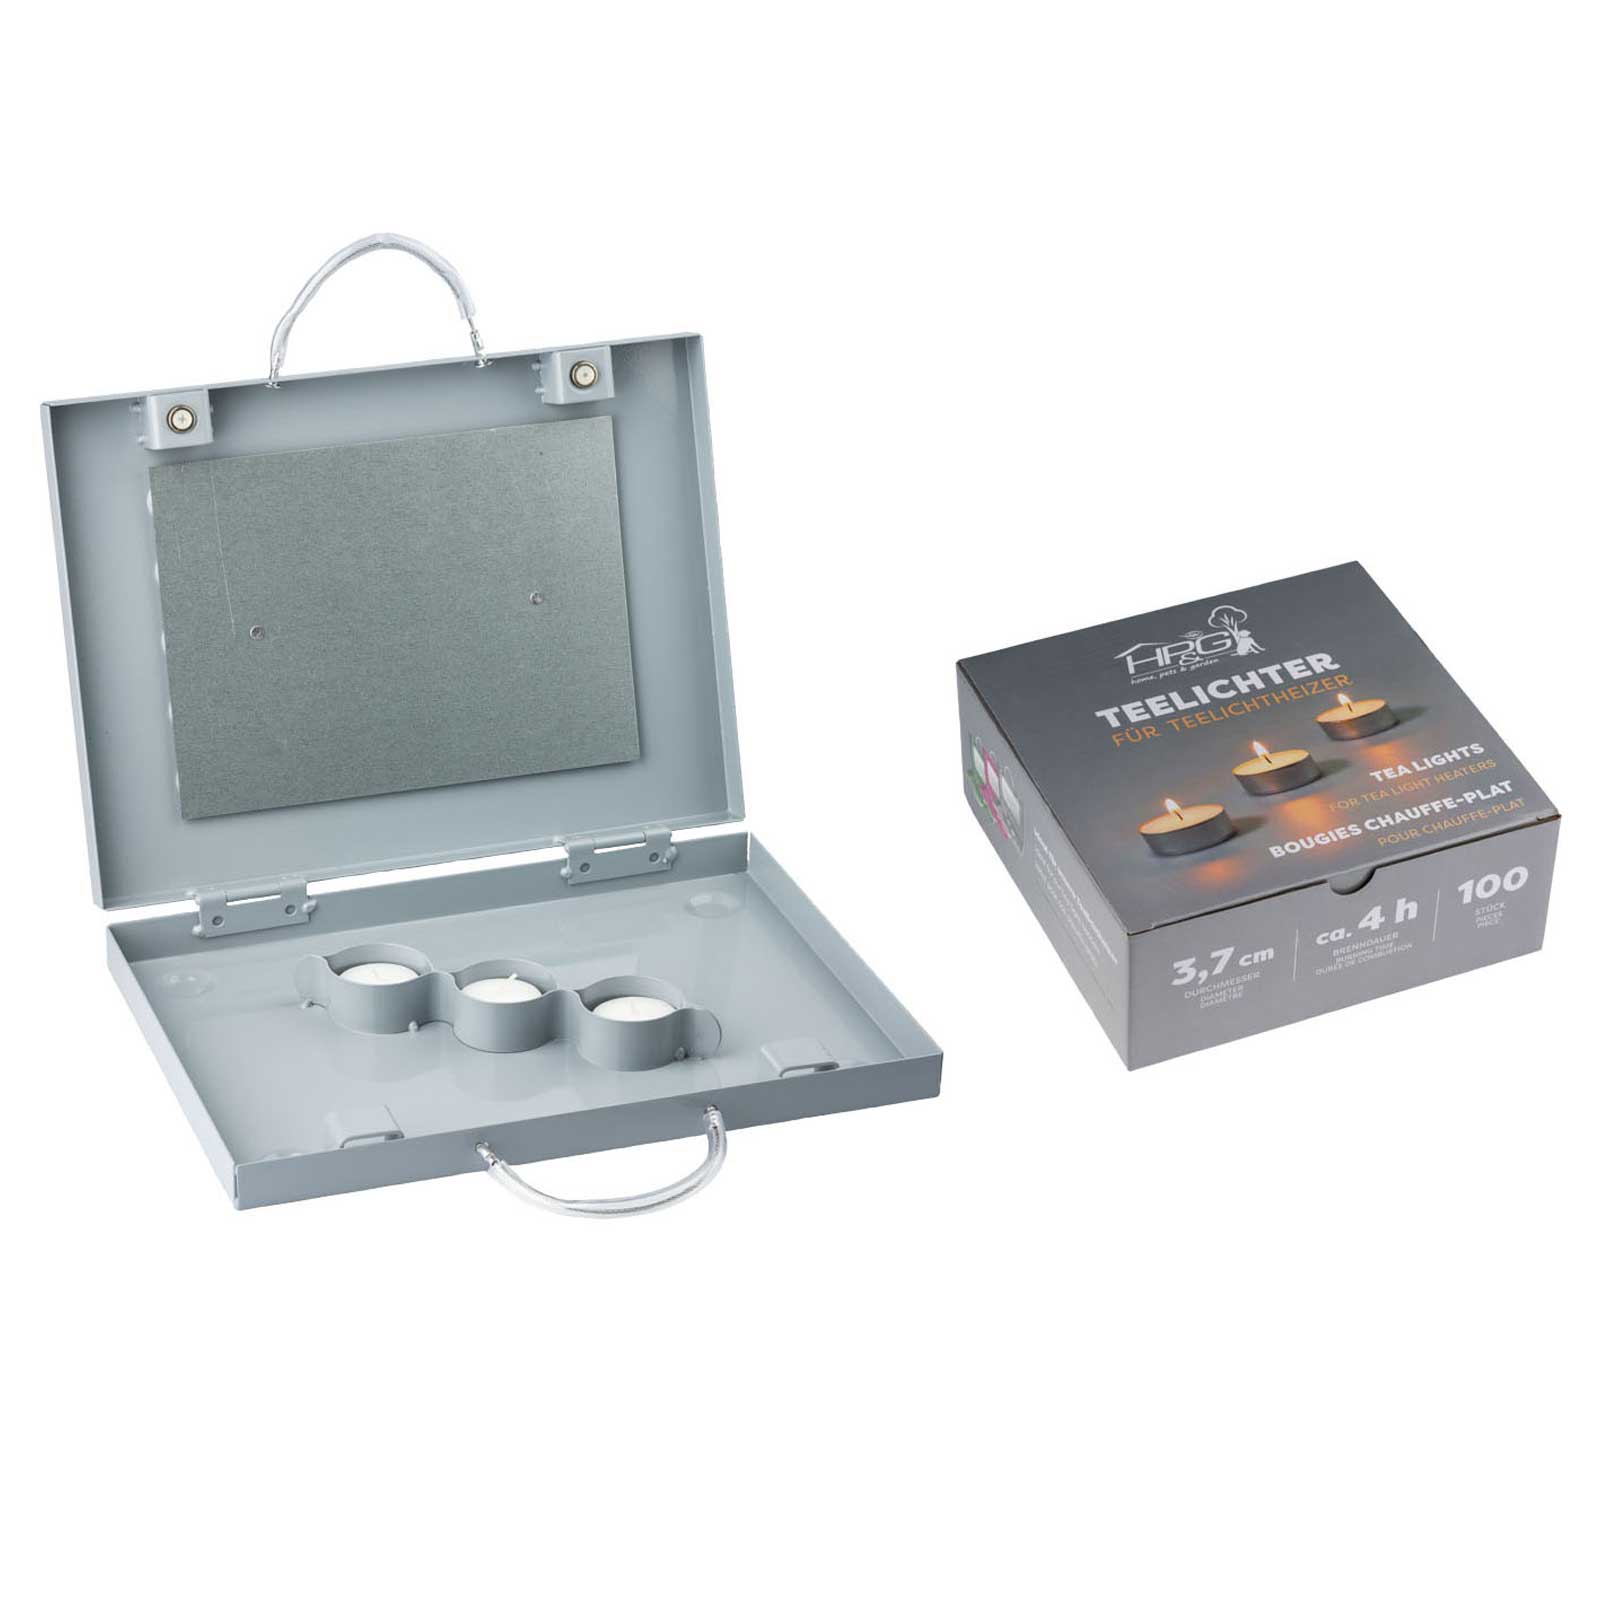 Eurohunt Teelichthizer Silver With Tea Lights 100 Er Pack